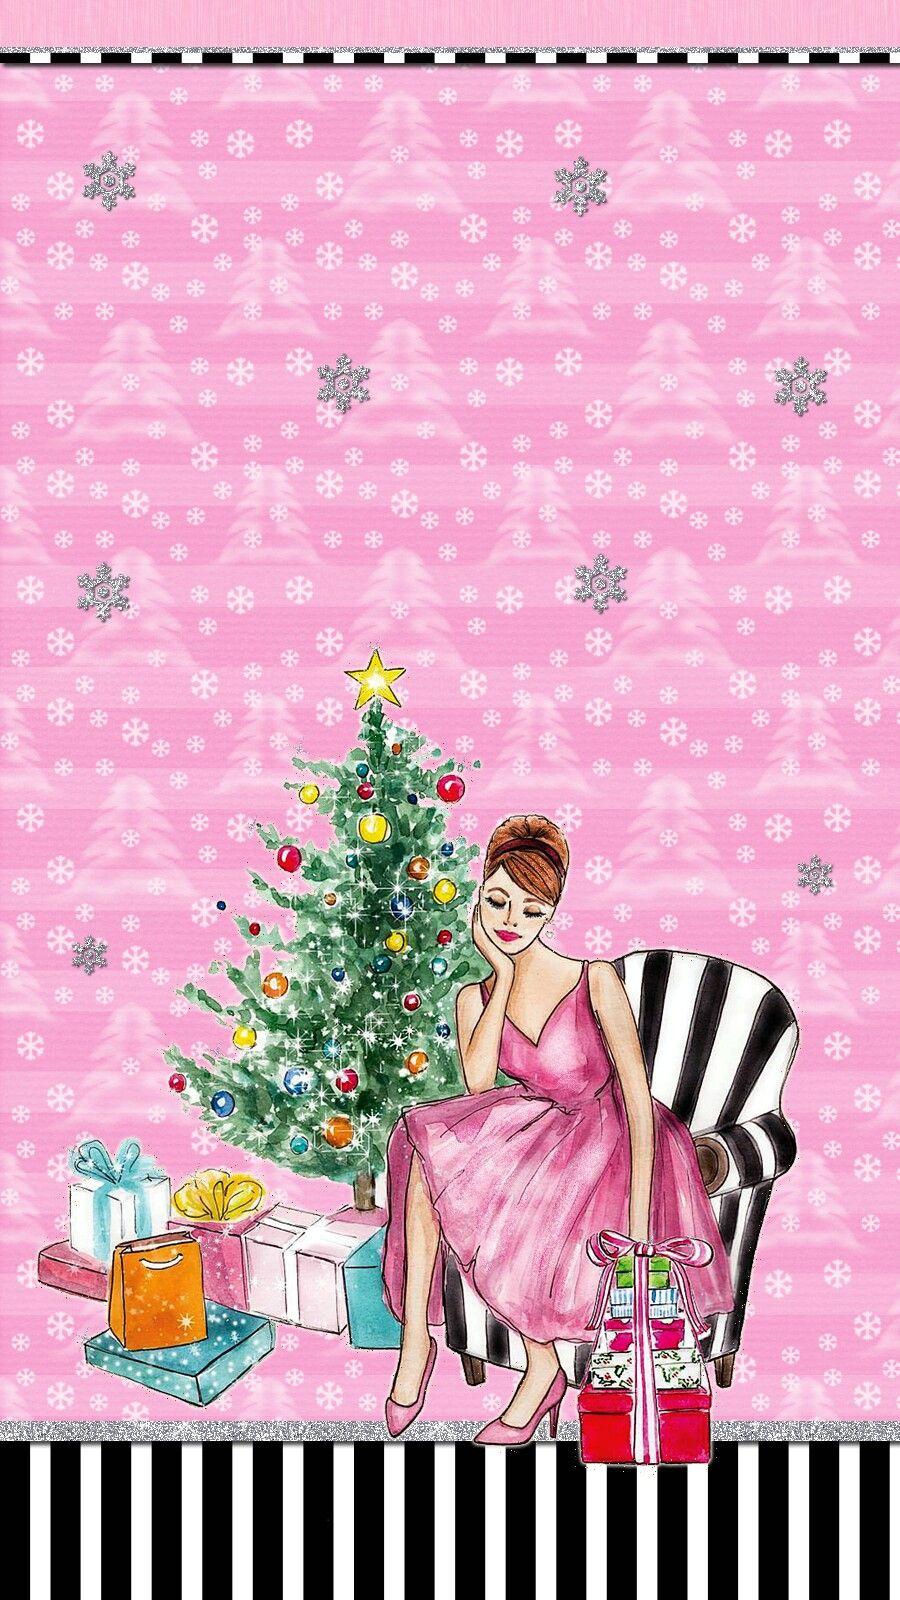 xmas #girl #wallpaper #iphone #android #theme #holiday